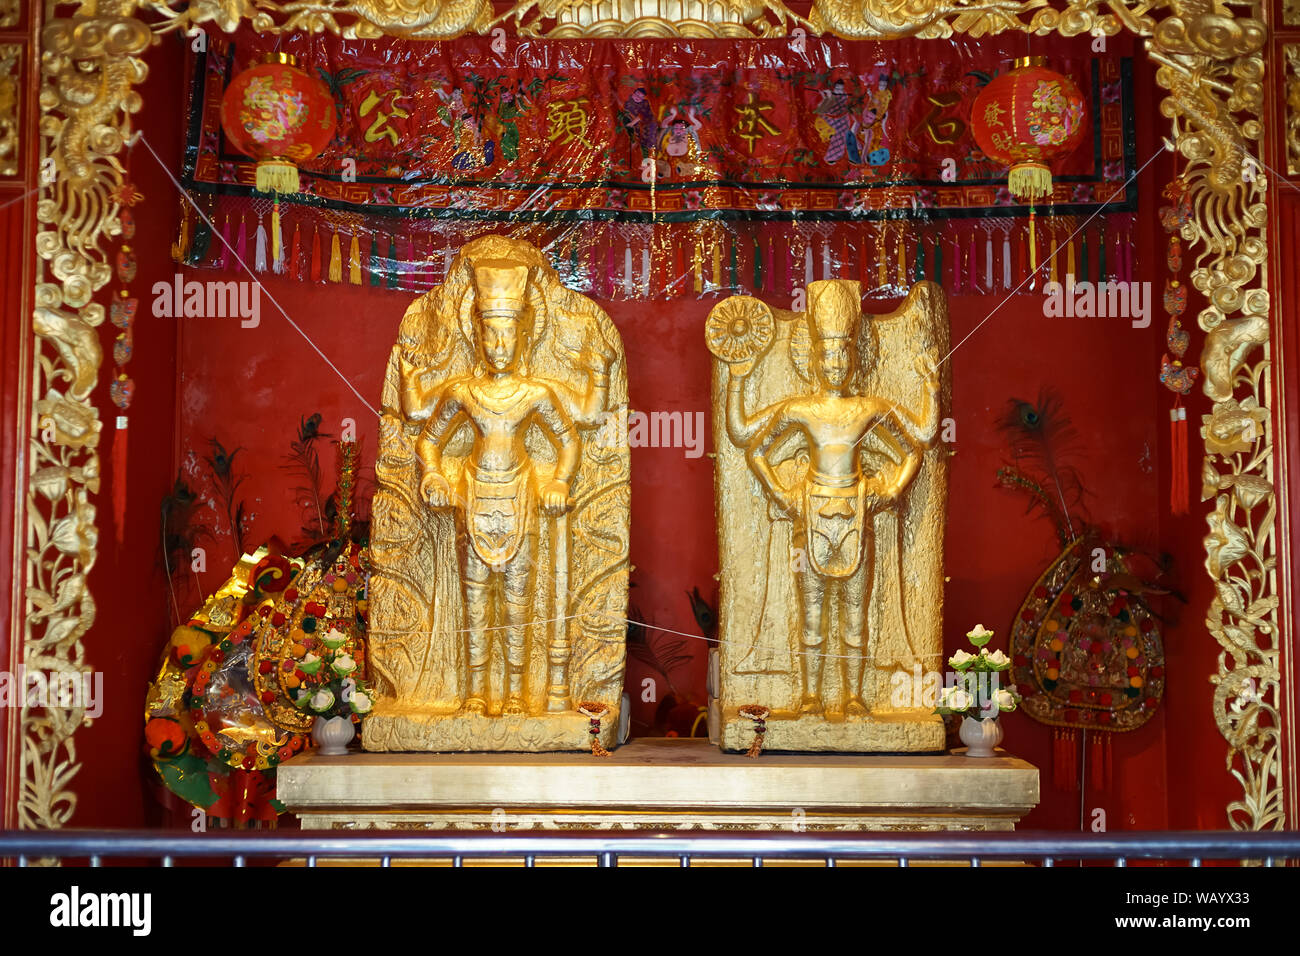 Suphan Buri, Thailand - May 25, 2019: Shrine of the city god in Celestial Dragon Village of Suphan buri, Thailand. Stock Photo